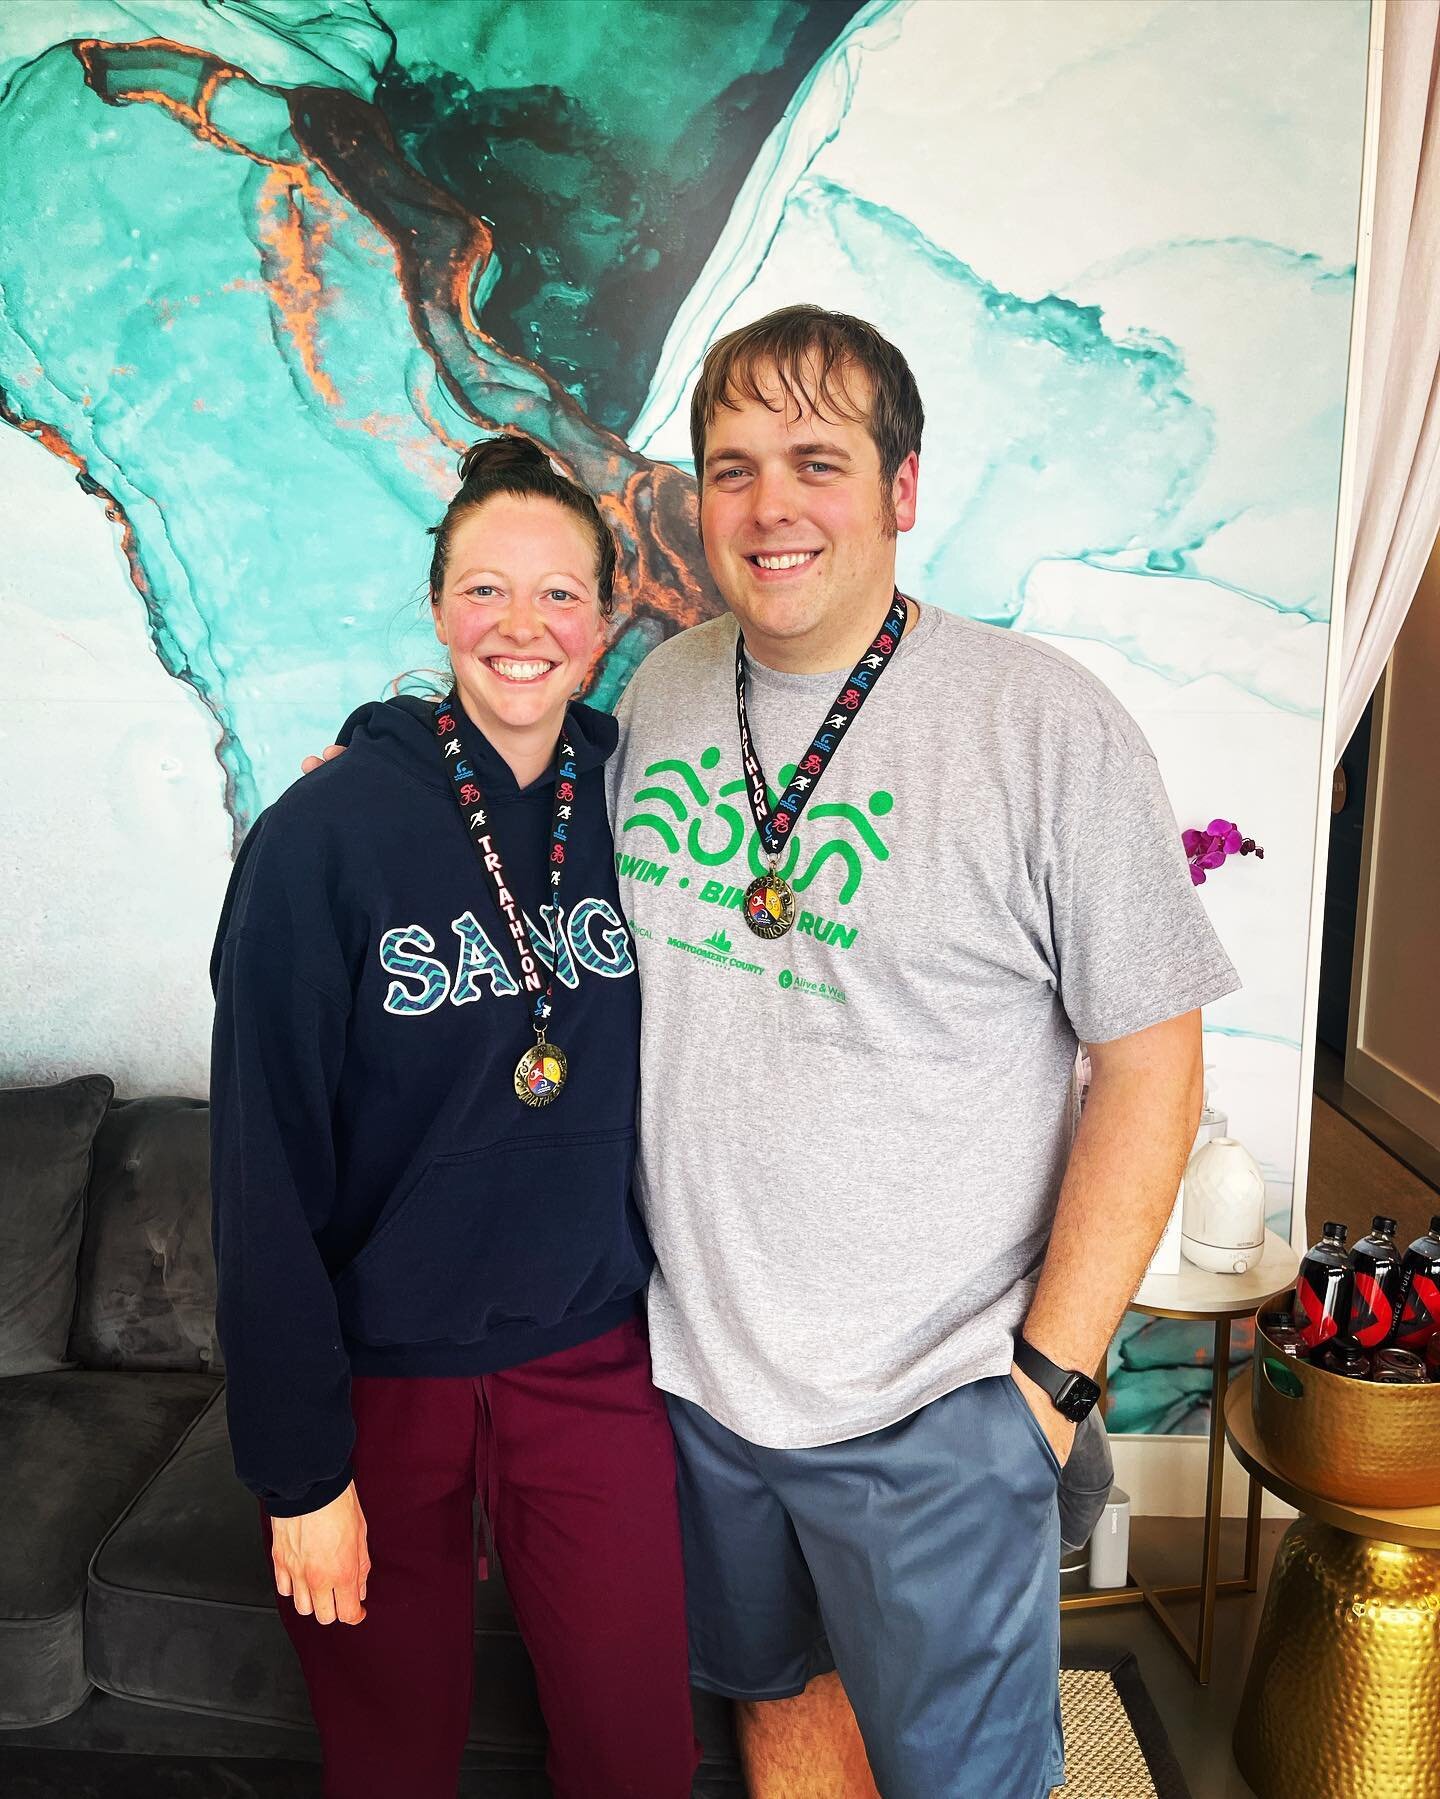 We are so excited for one our favorite couples Bethany + Scott for placing third in a triathlon today. Scott stated &ldquo;before using the saunas I could barely run a mile.&rdquo; Congratulations to both of you! &hearts;️✨